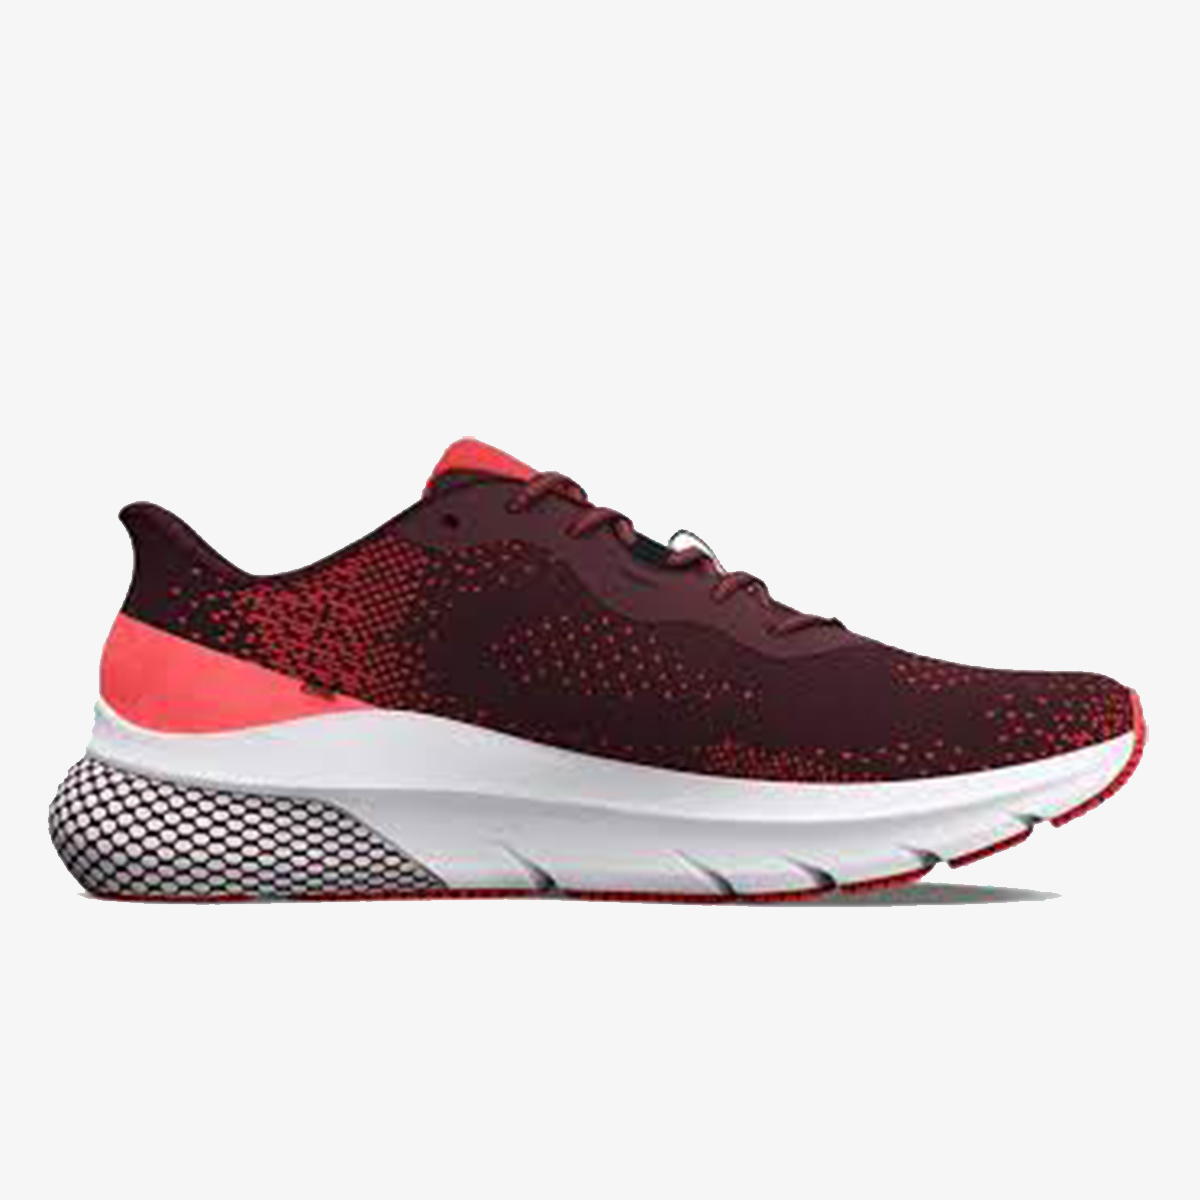 Under Armour Patike HOVR Turbulence 2 